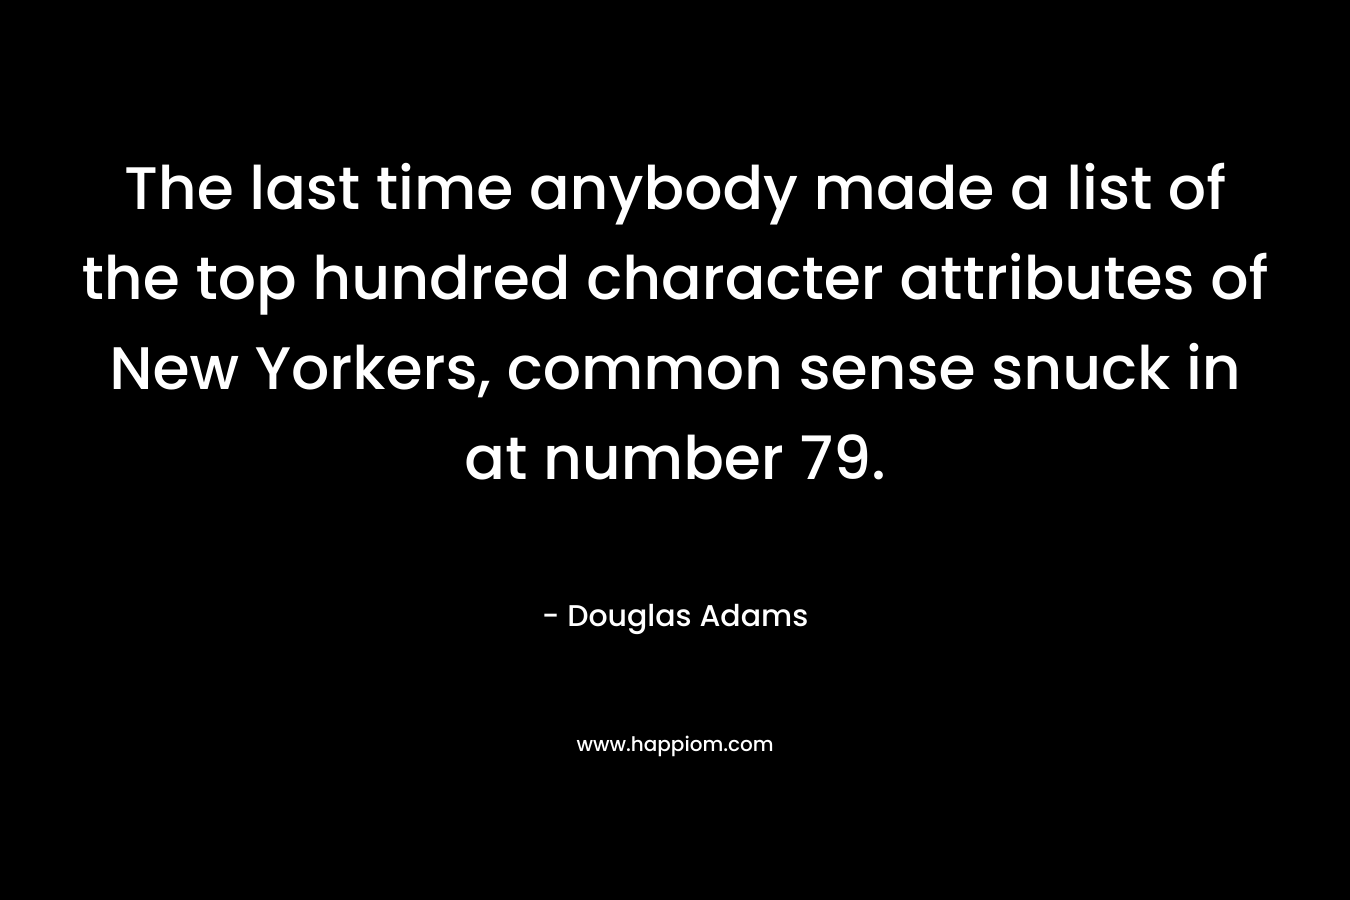 The last time anybody made a list of the top hundred character attributes of New Yorkers, common sense snuck in at number 79. – Douglas Adams